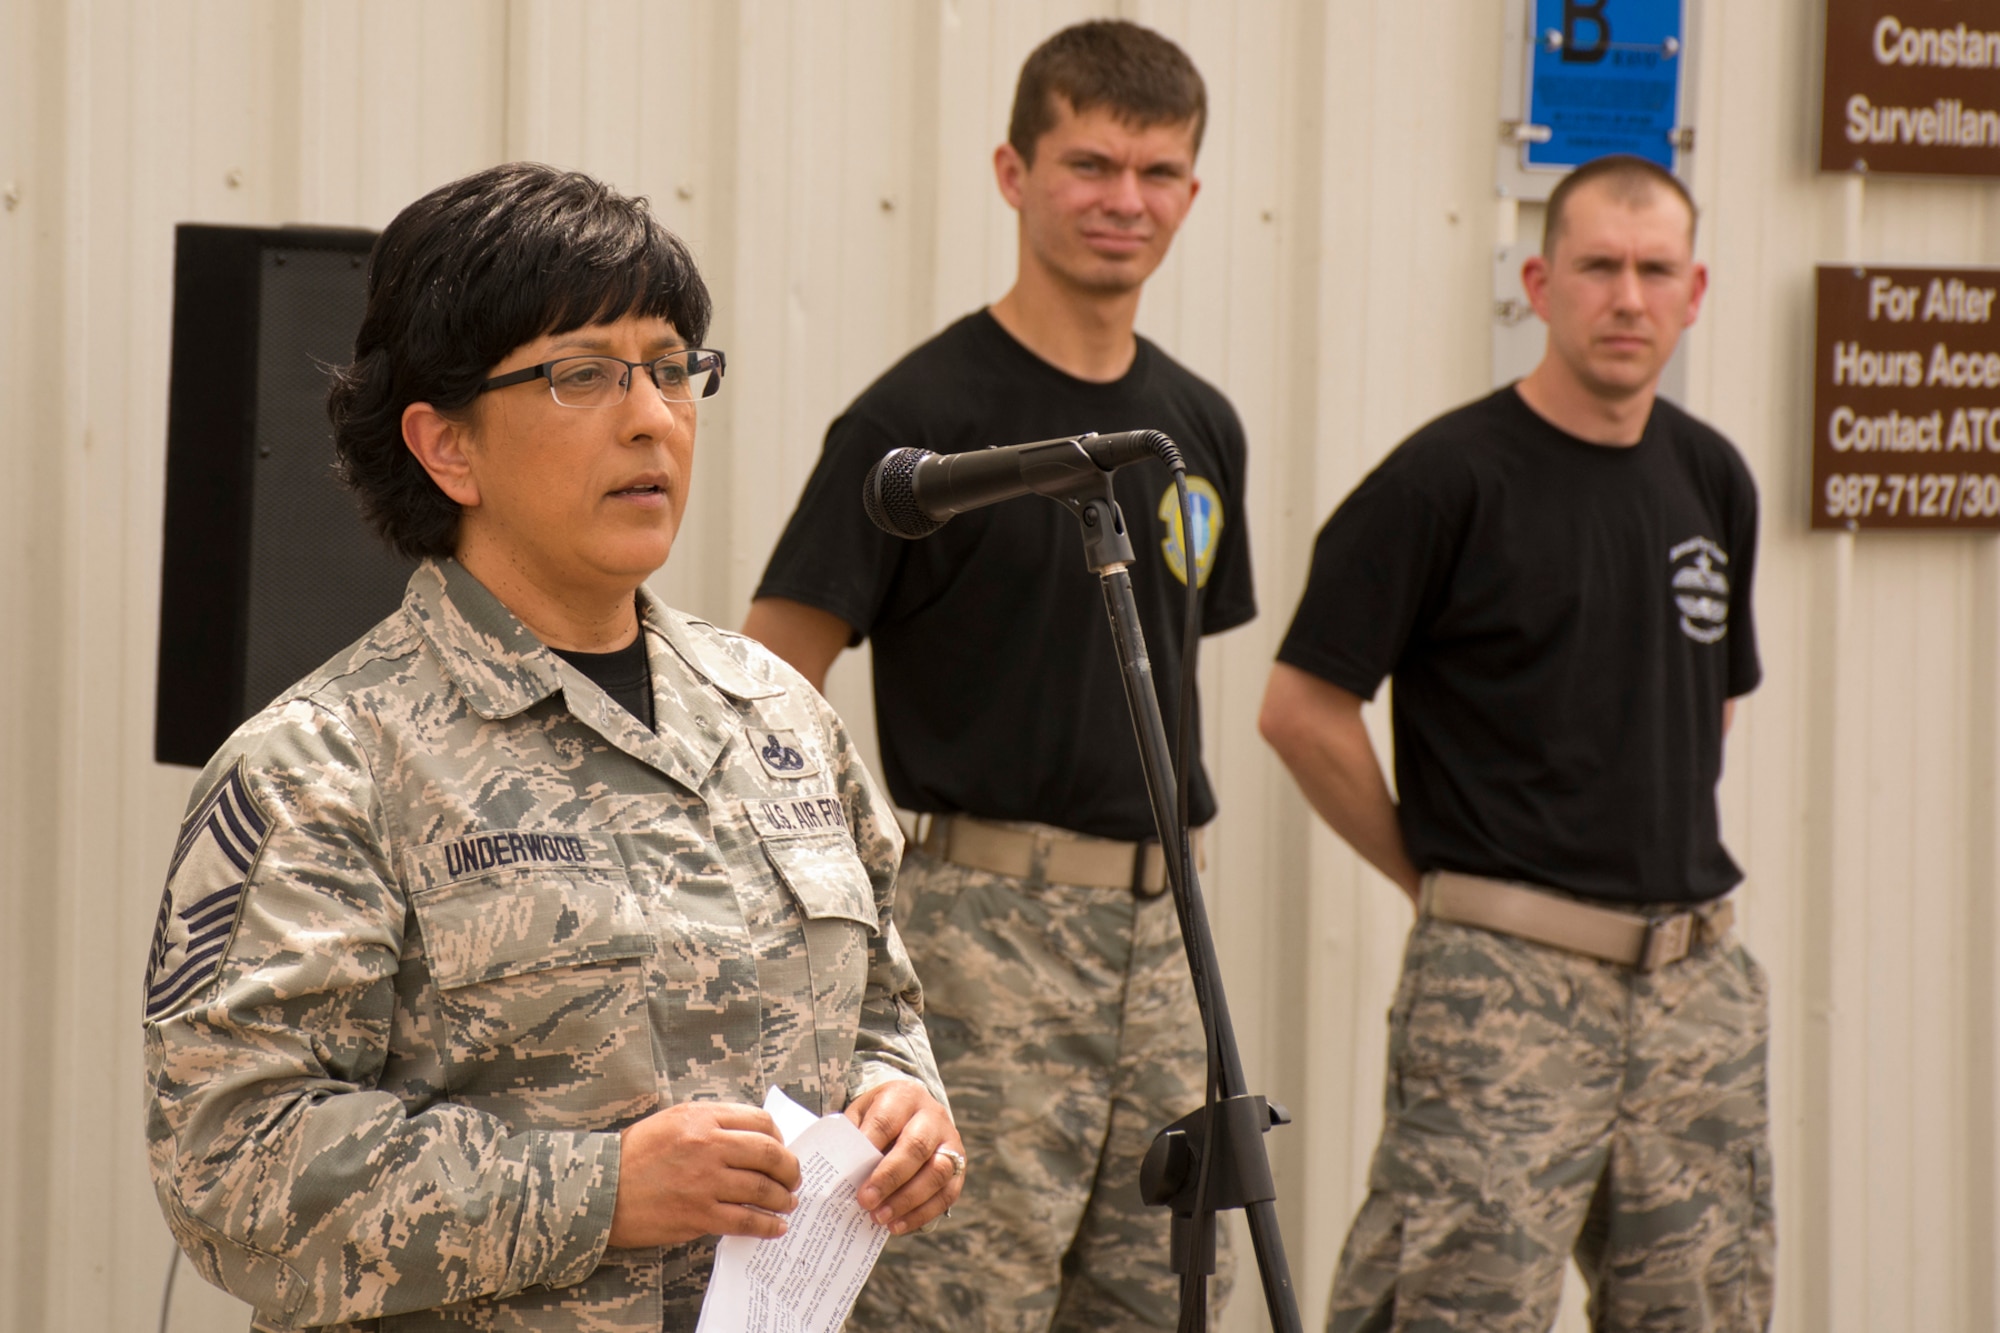 U.S. Air Force Reserve Chief Master Sgt. Cynthia Underwood, superintendent, 96th Aerial Port Squadron, speaks to the gathering before the 4th Annual Port Dawg Memorial Run May 19, 2017, at Little Rock Air Force Base, Ark. Members of the 96th APS and the 19th Logistics Readiness Squadron joined each other for a 2.2 mile run honoring “Port Dawgs” across the Air Force who lost their lives in 2016. (U.S. Air Force photo by Master Sgt. Jeff Walston/Released)